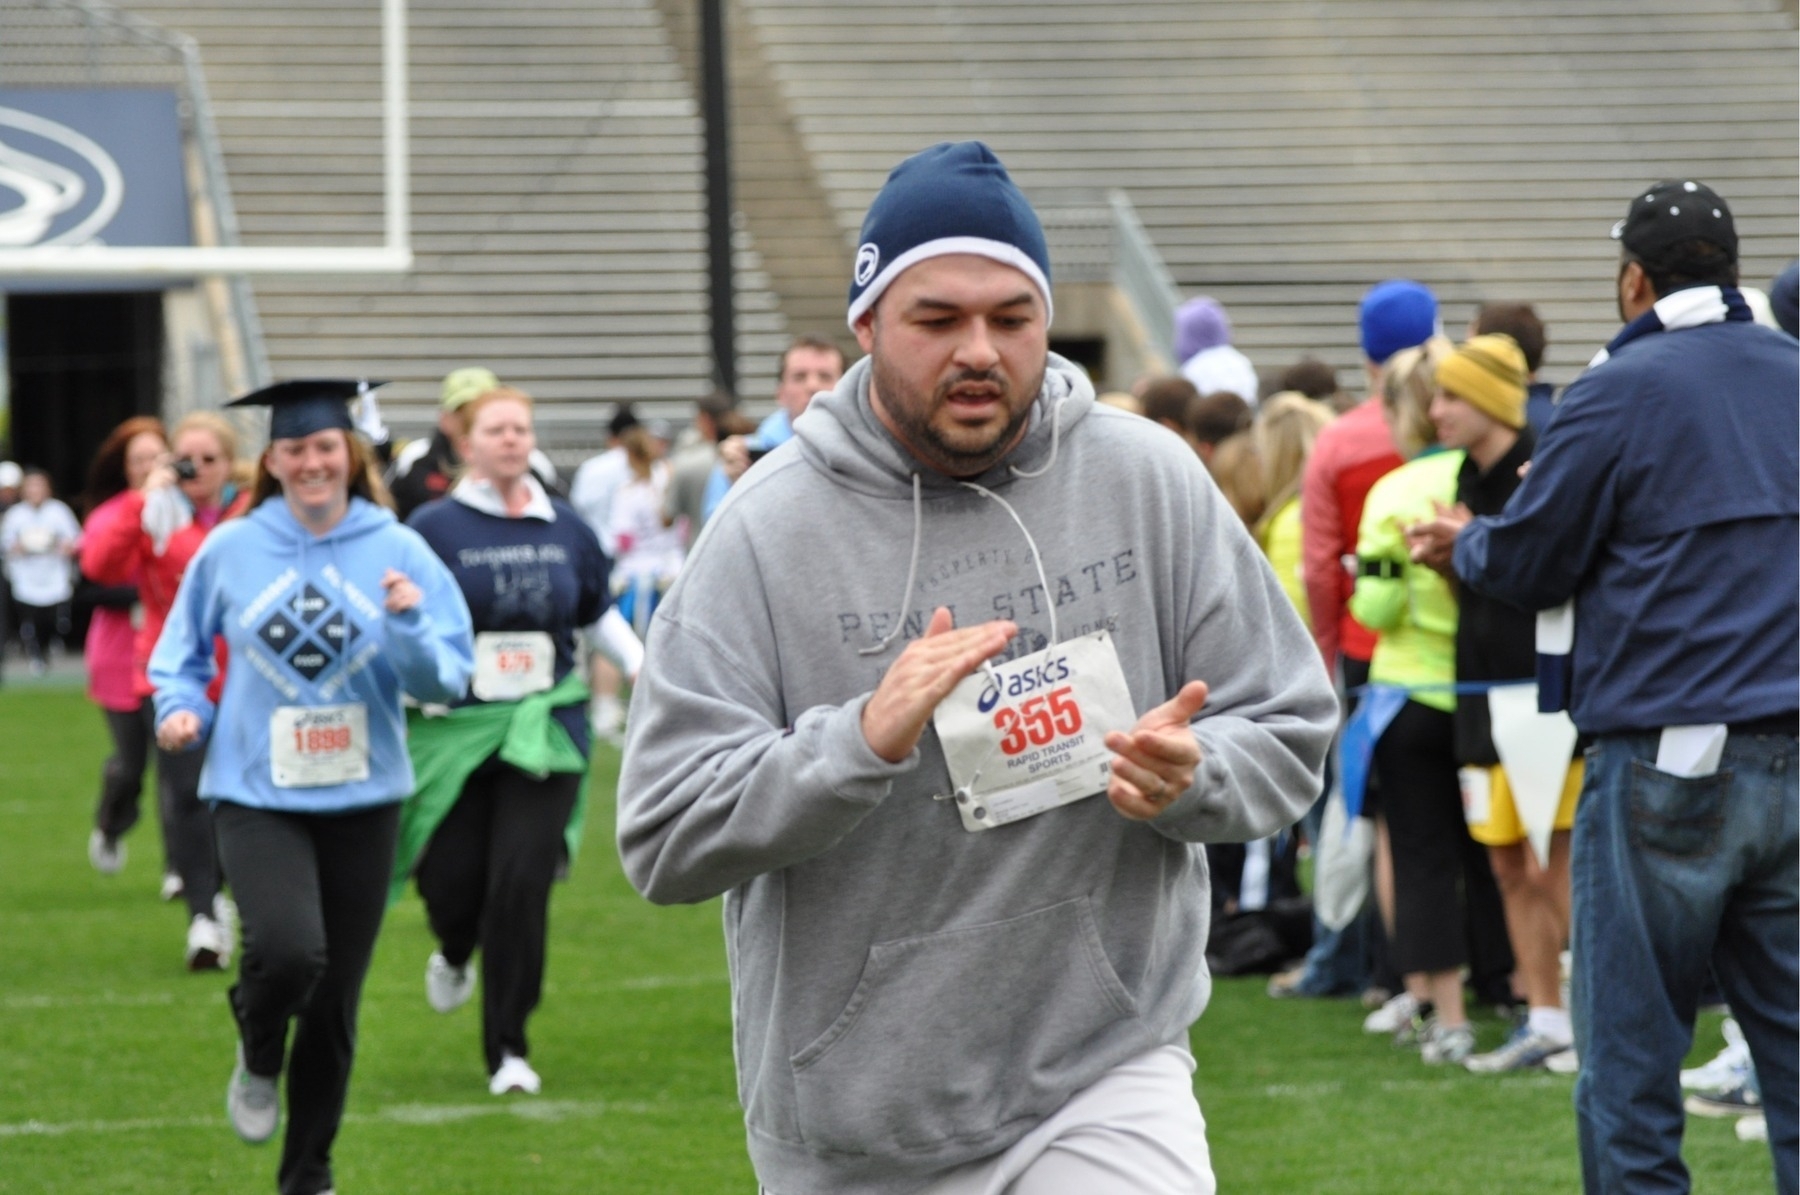 Me, finishing the 2012 Beaver Stadium Run with Franco Harris in the background.